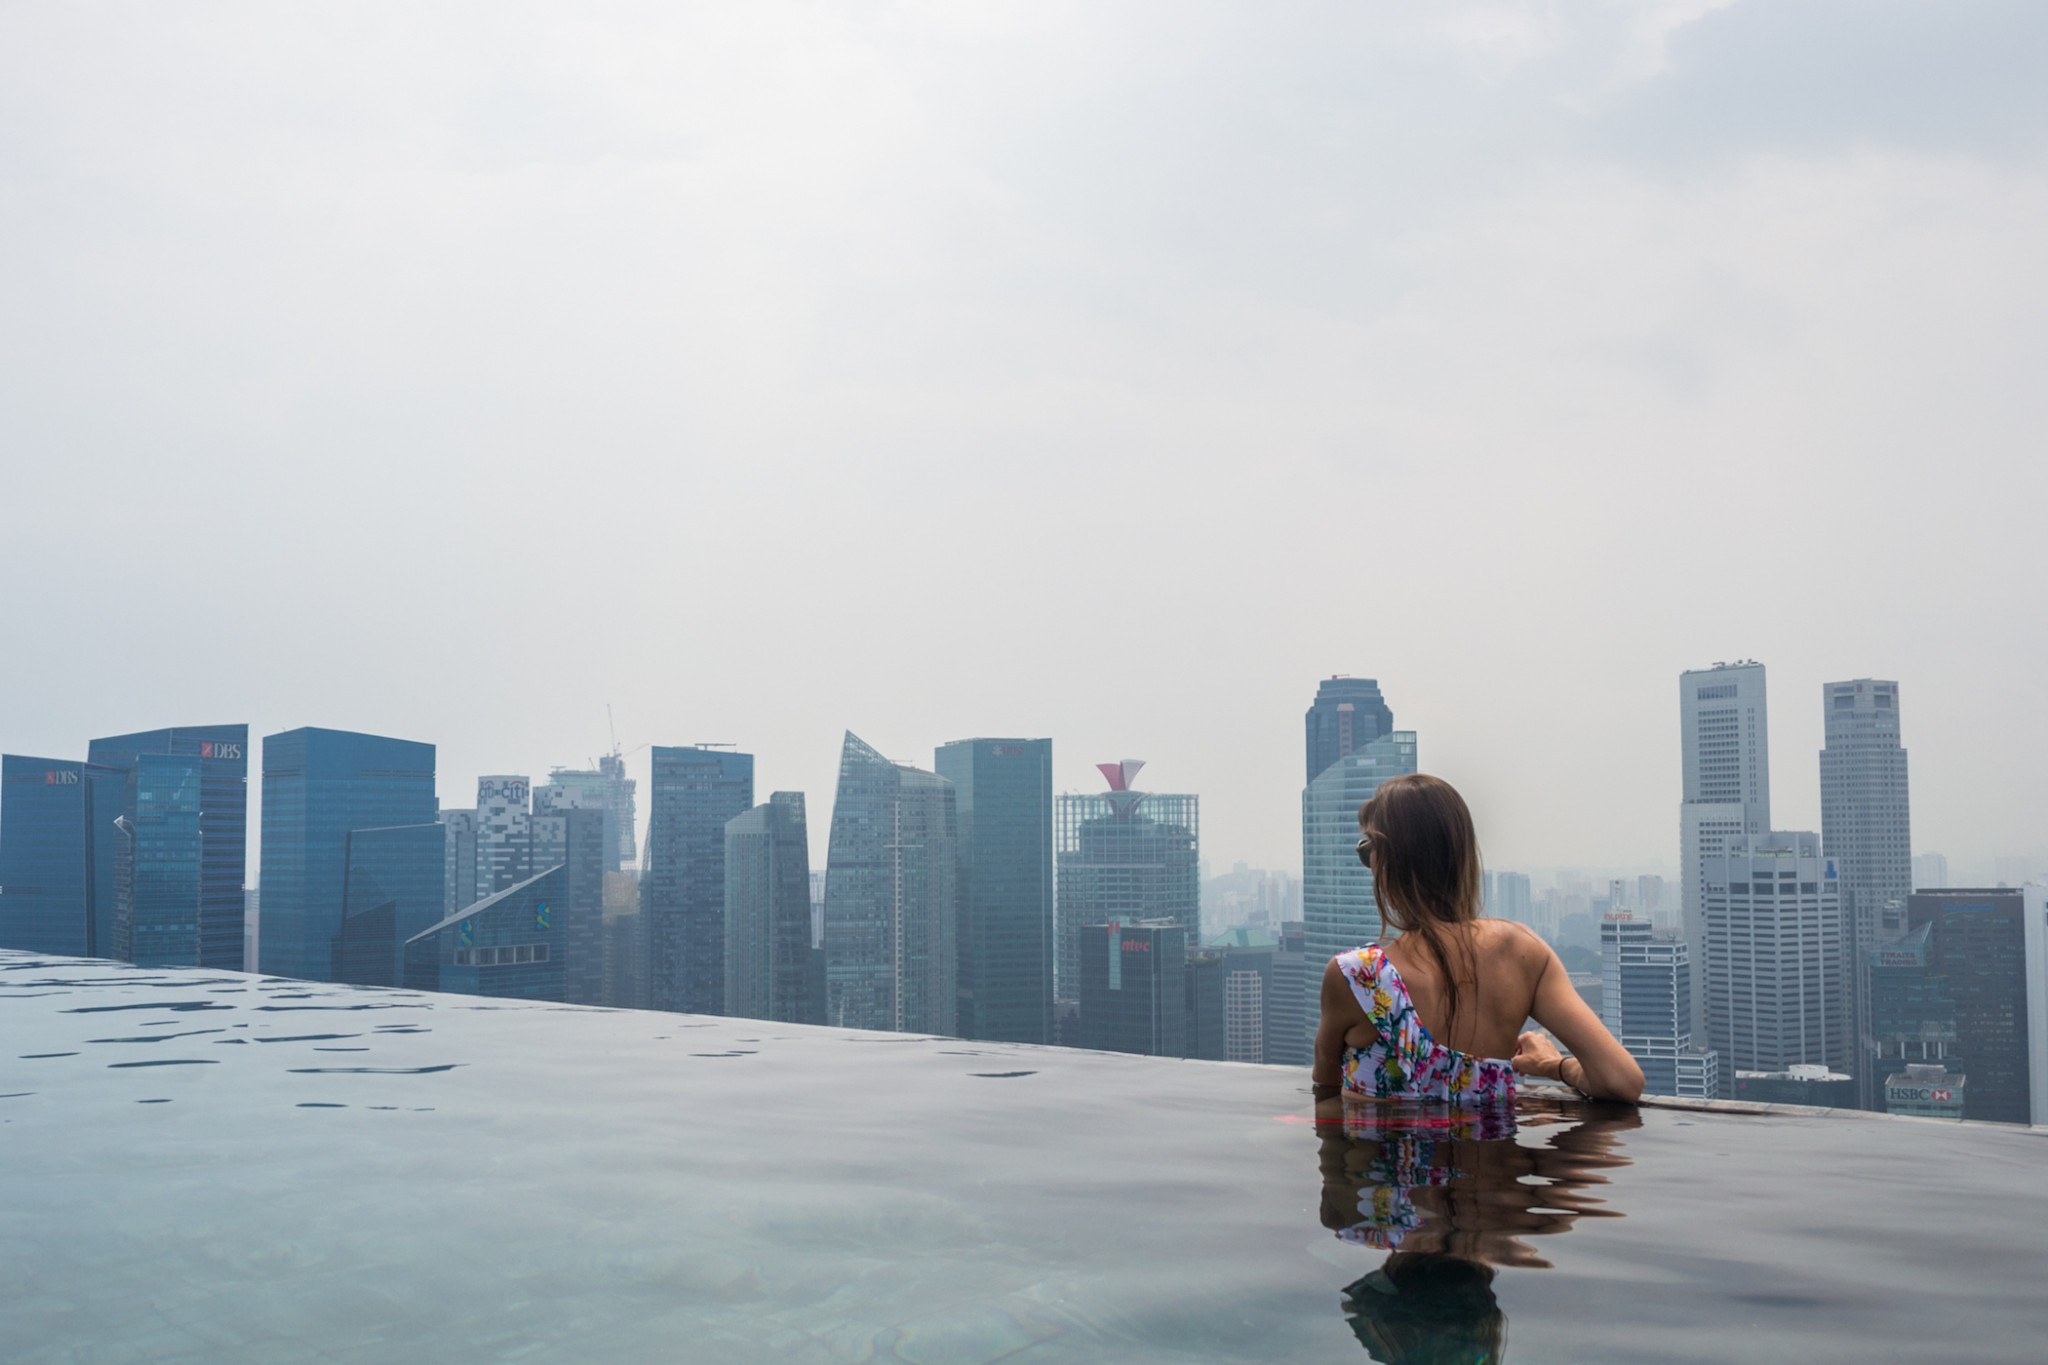 The infinity pool at Marina Bay Sands overlooking the city of Singapore. 